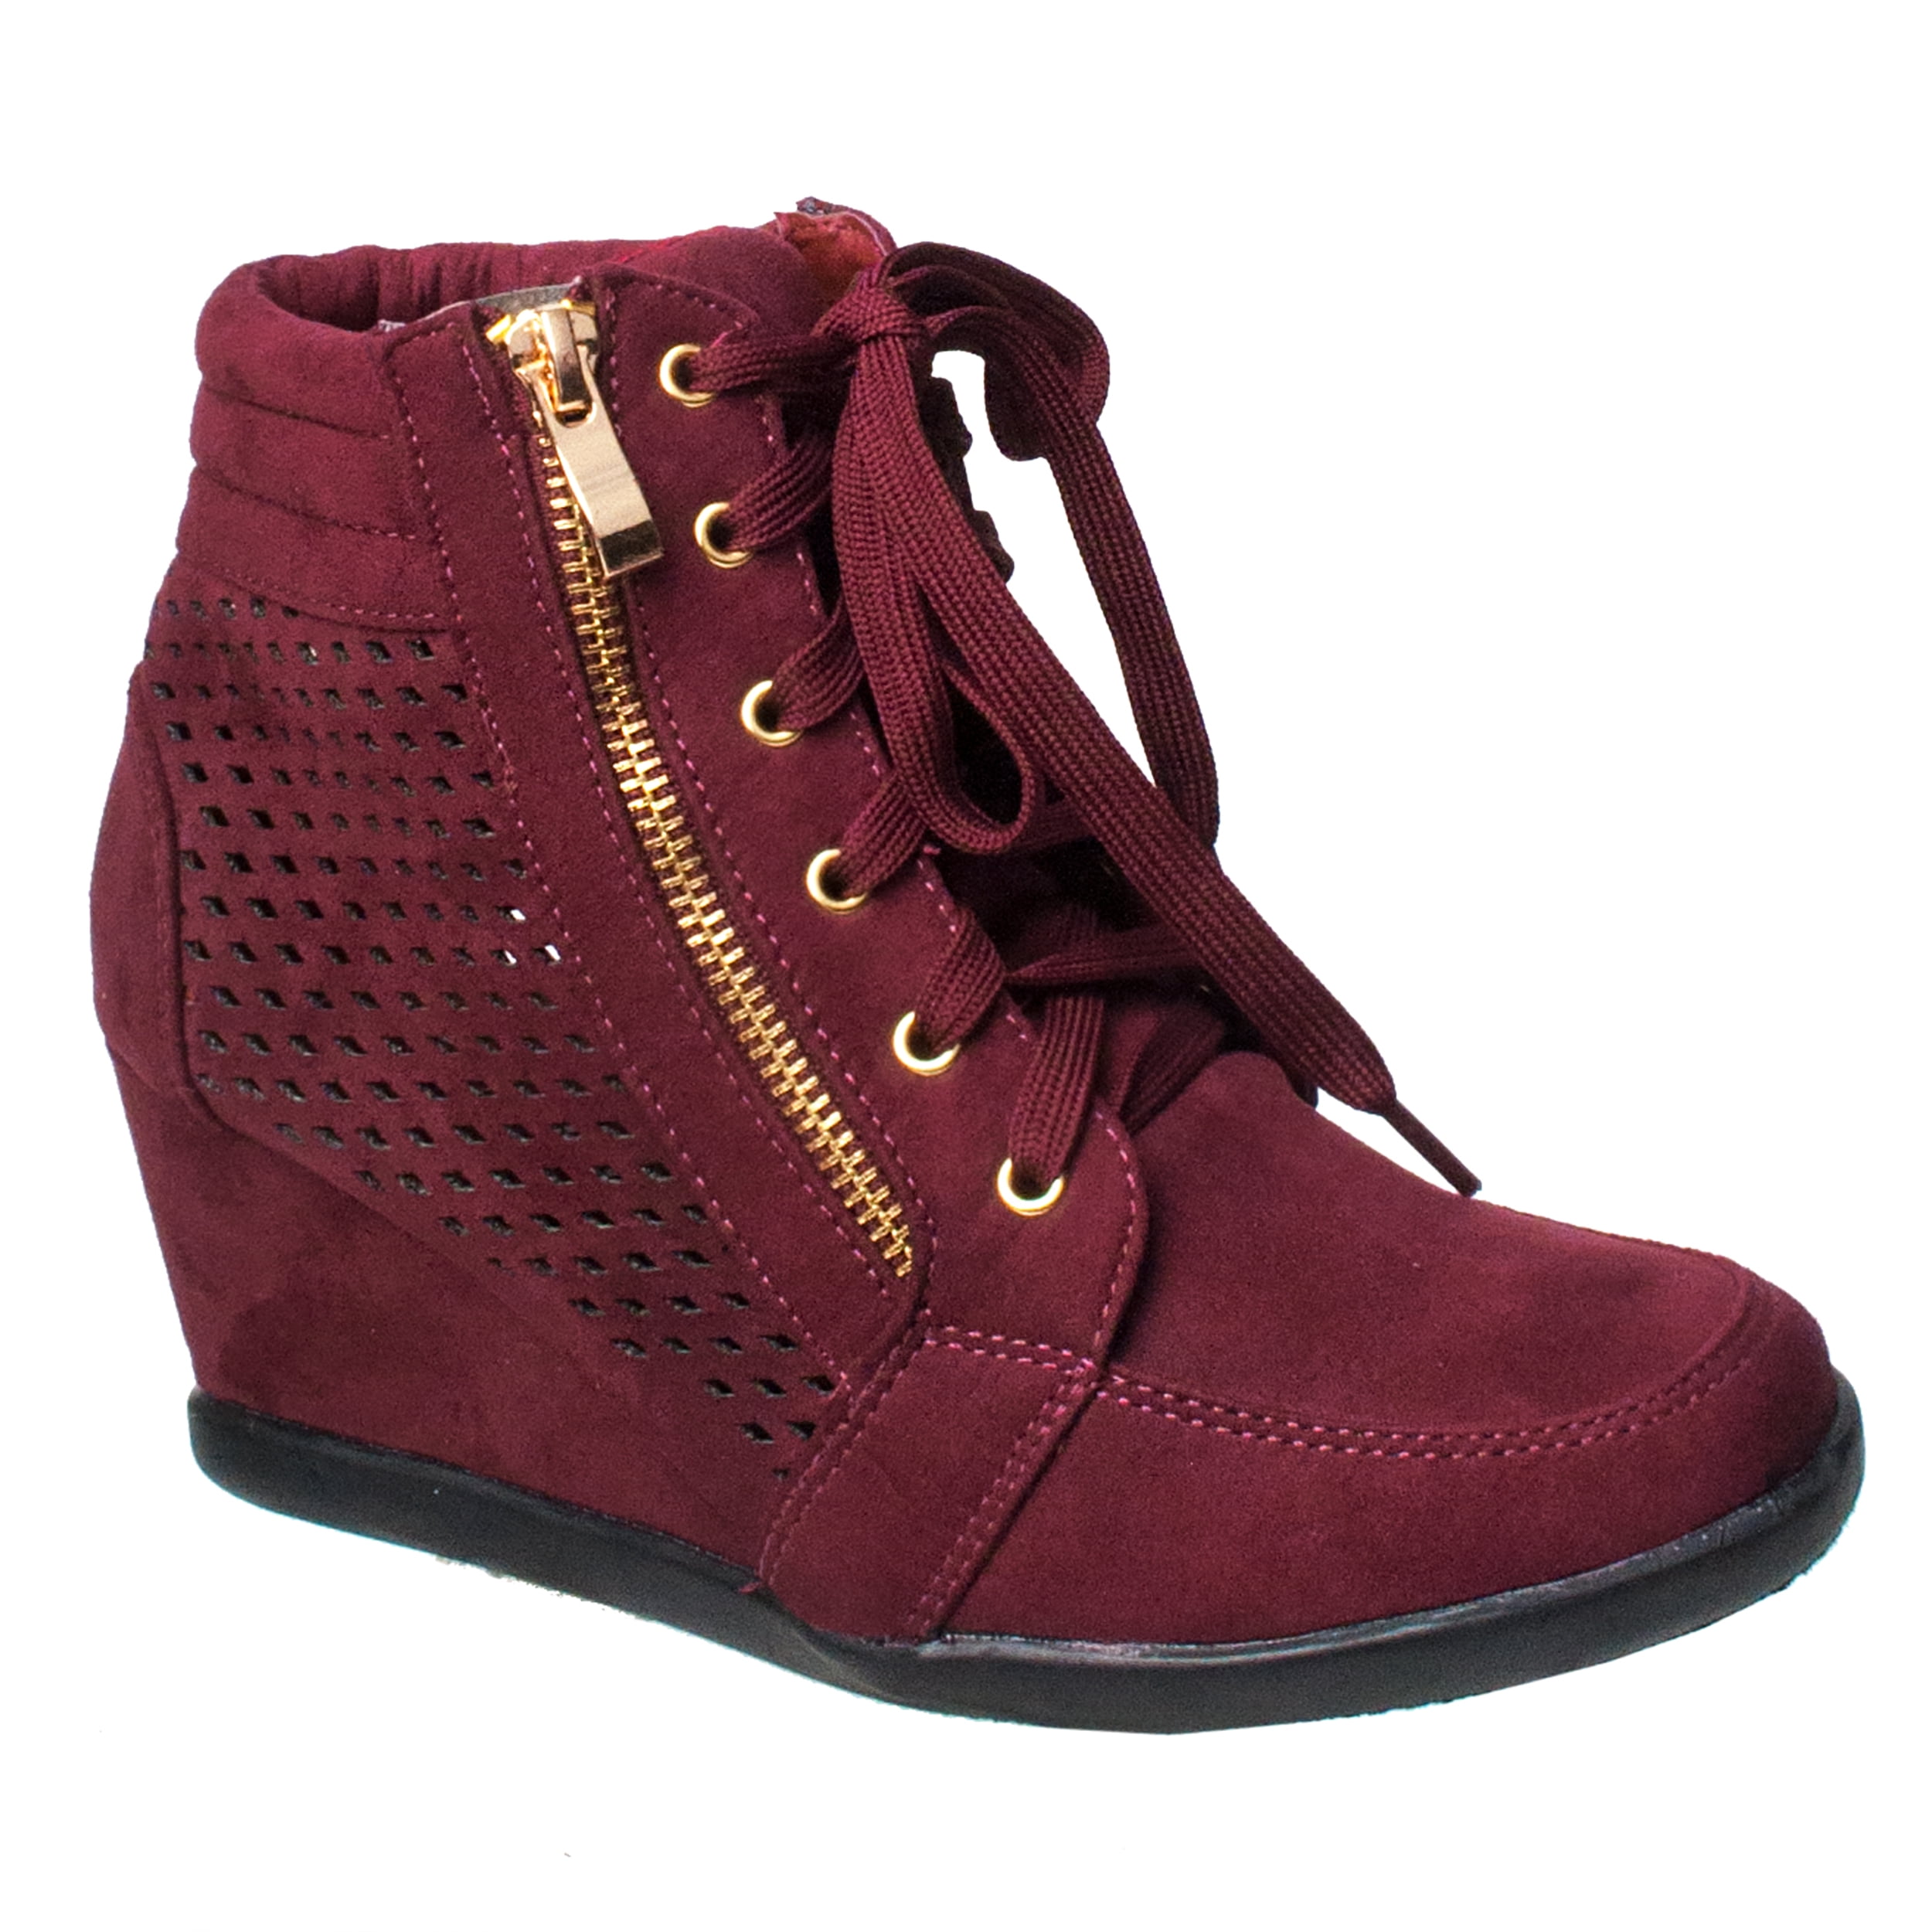 Details about   Fashion Sneakers Women Leather Platform Wedge High Heels Ankle Boots Casual Shoe 